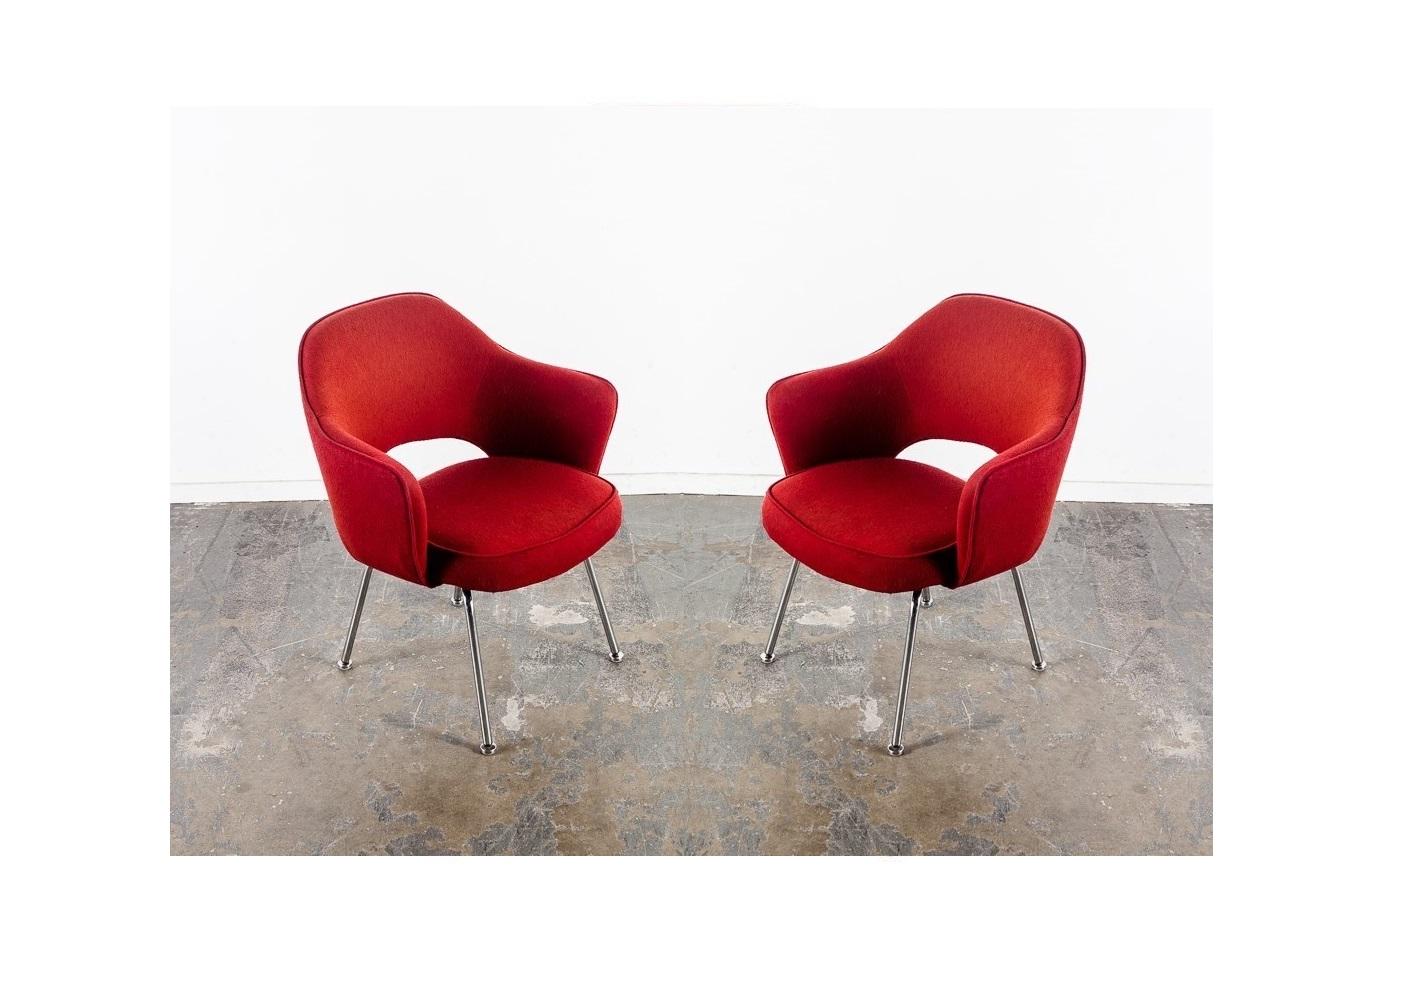 Eero Saarinen (1910–1961) was a Finnish American architect and Industrial designer of the 20th century. He designed his executive chair in 1950. These Eero Saarinen Model 71 Executive armchairs manufactured by Knoll. Chairs with chrome tubular base